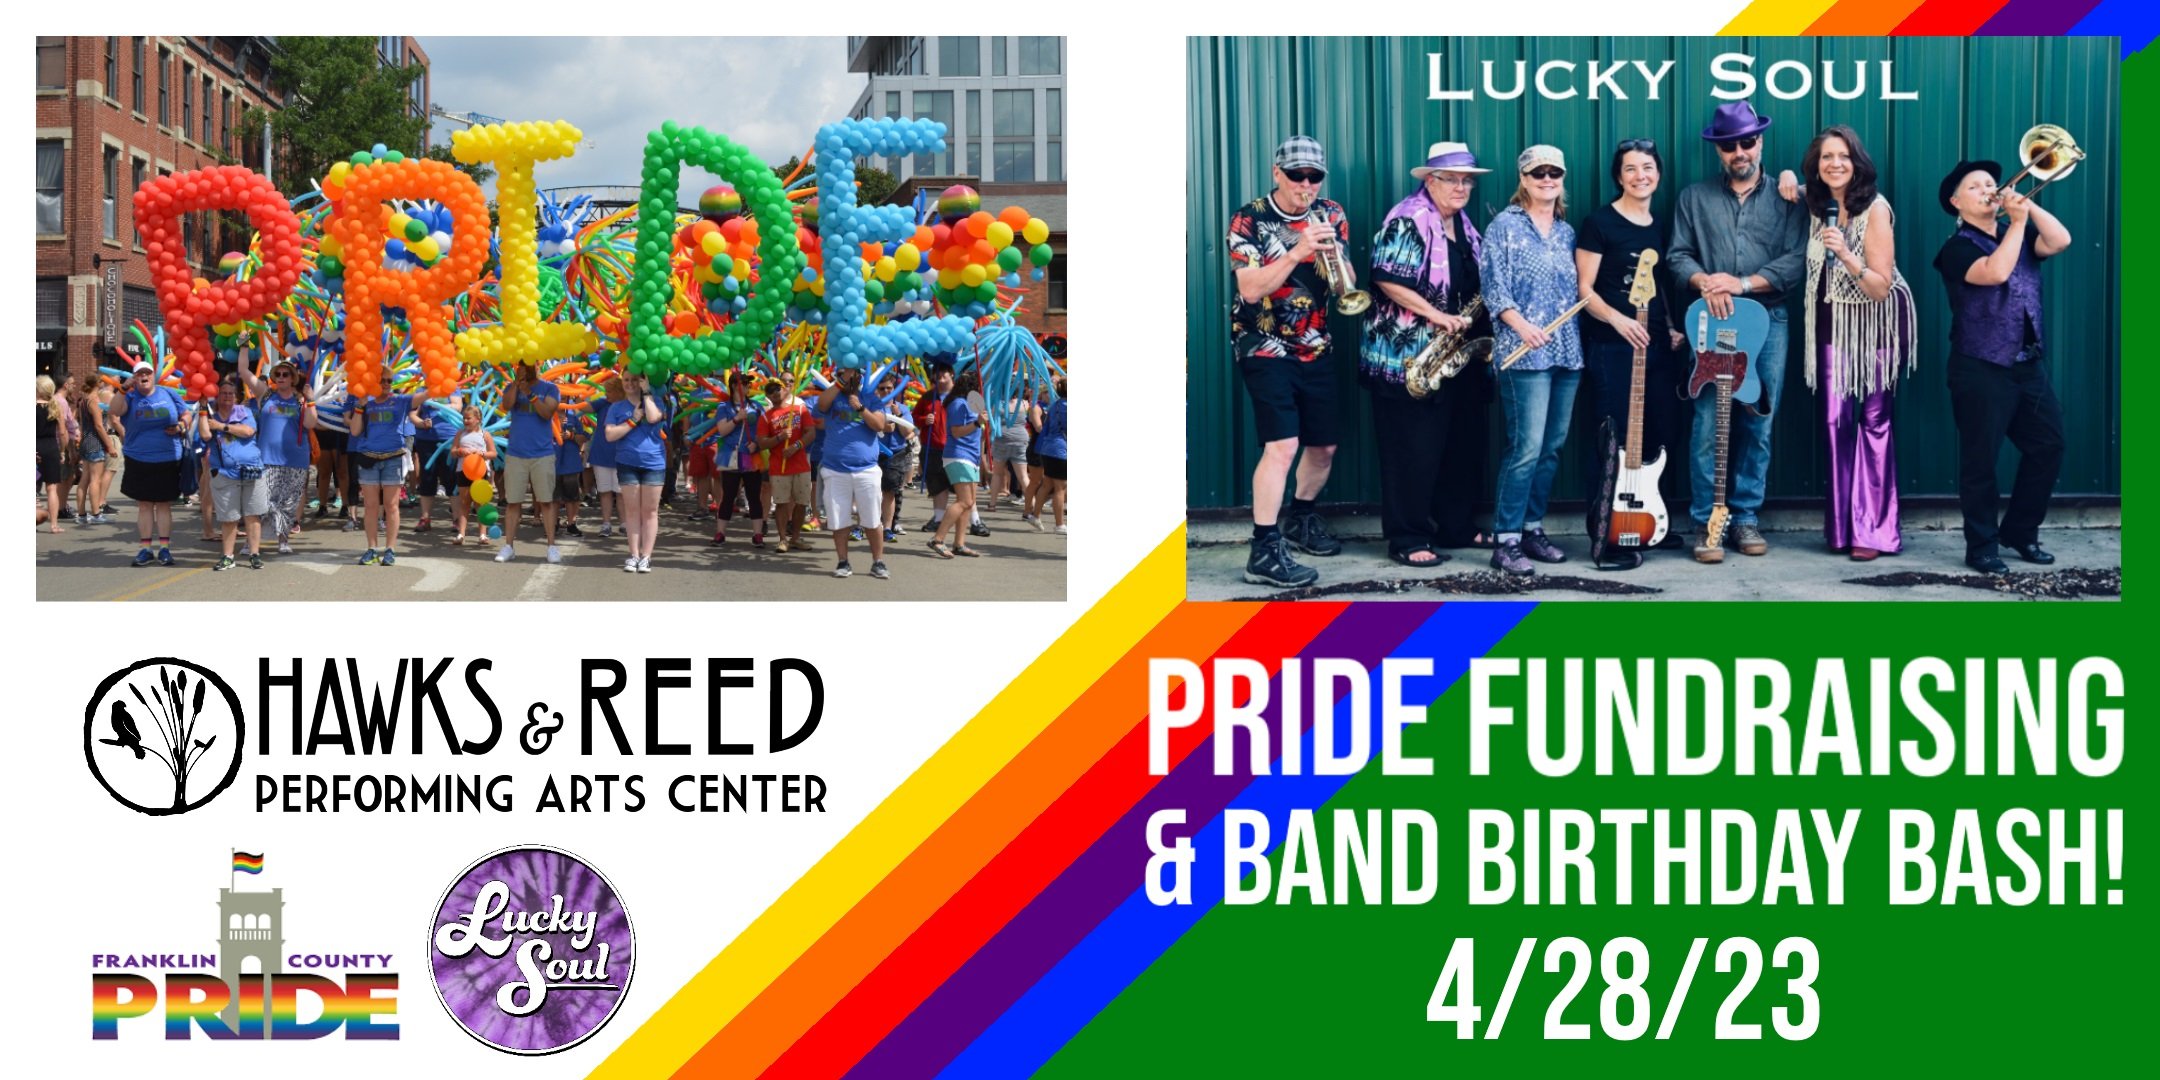 Lucky Soul: Pride fundraiser and Birthday Bash